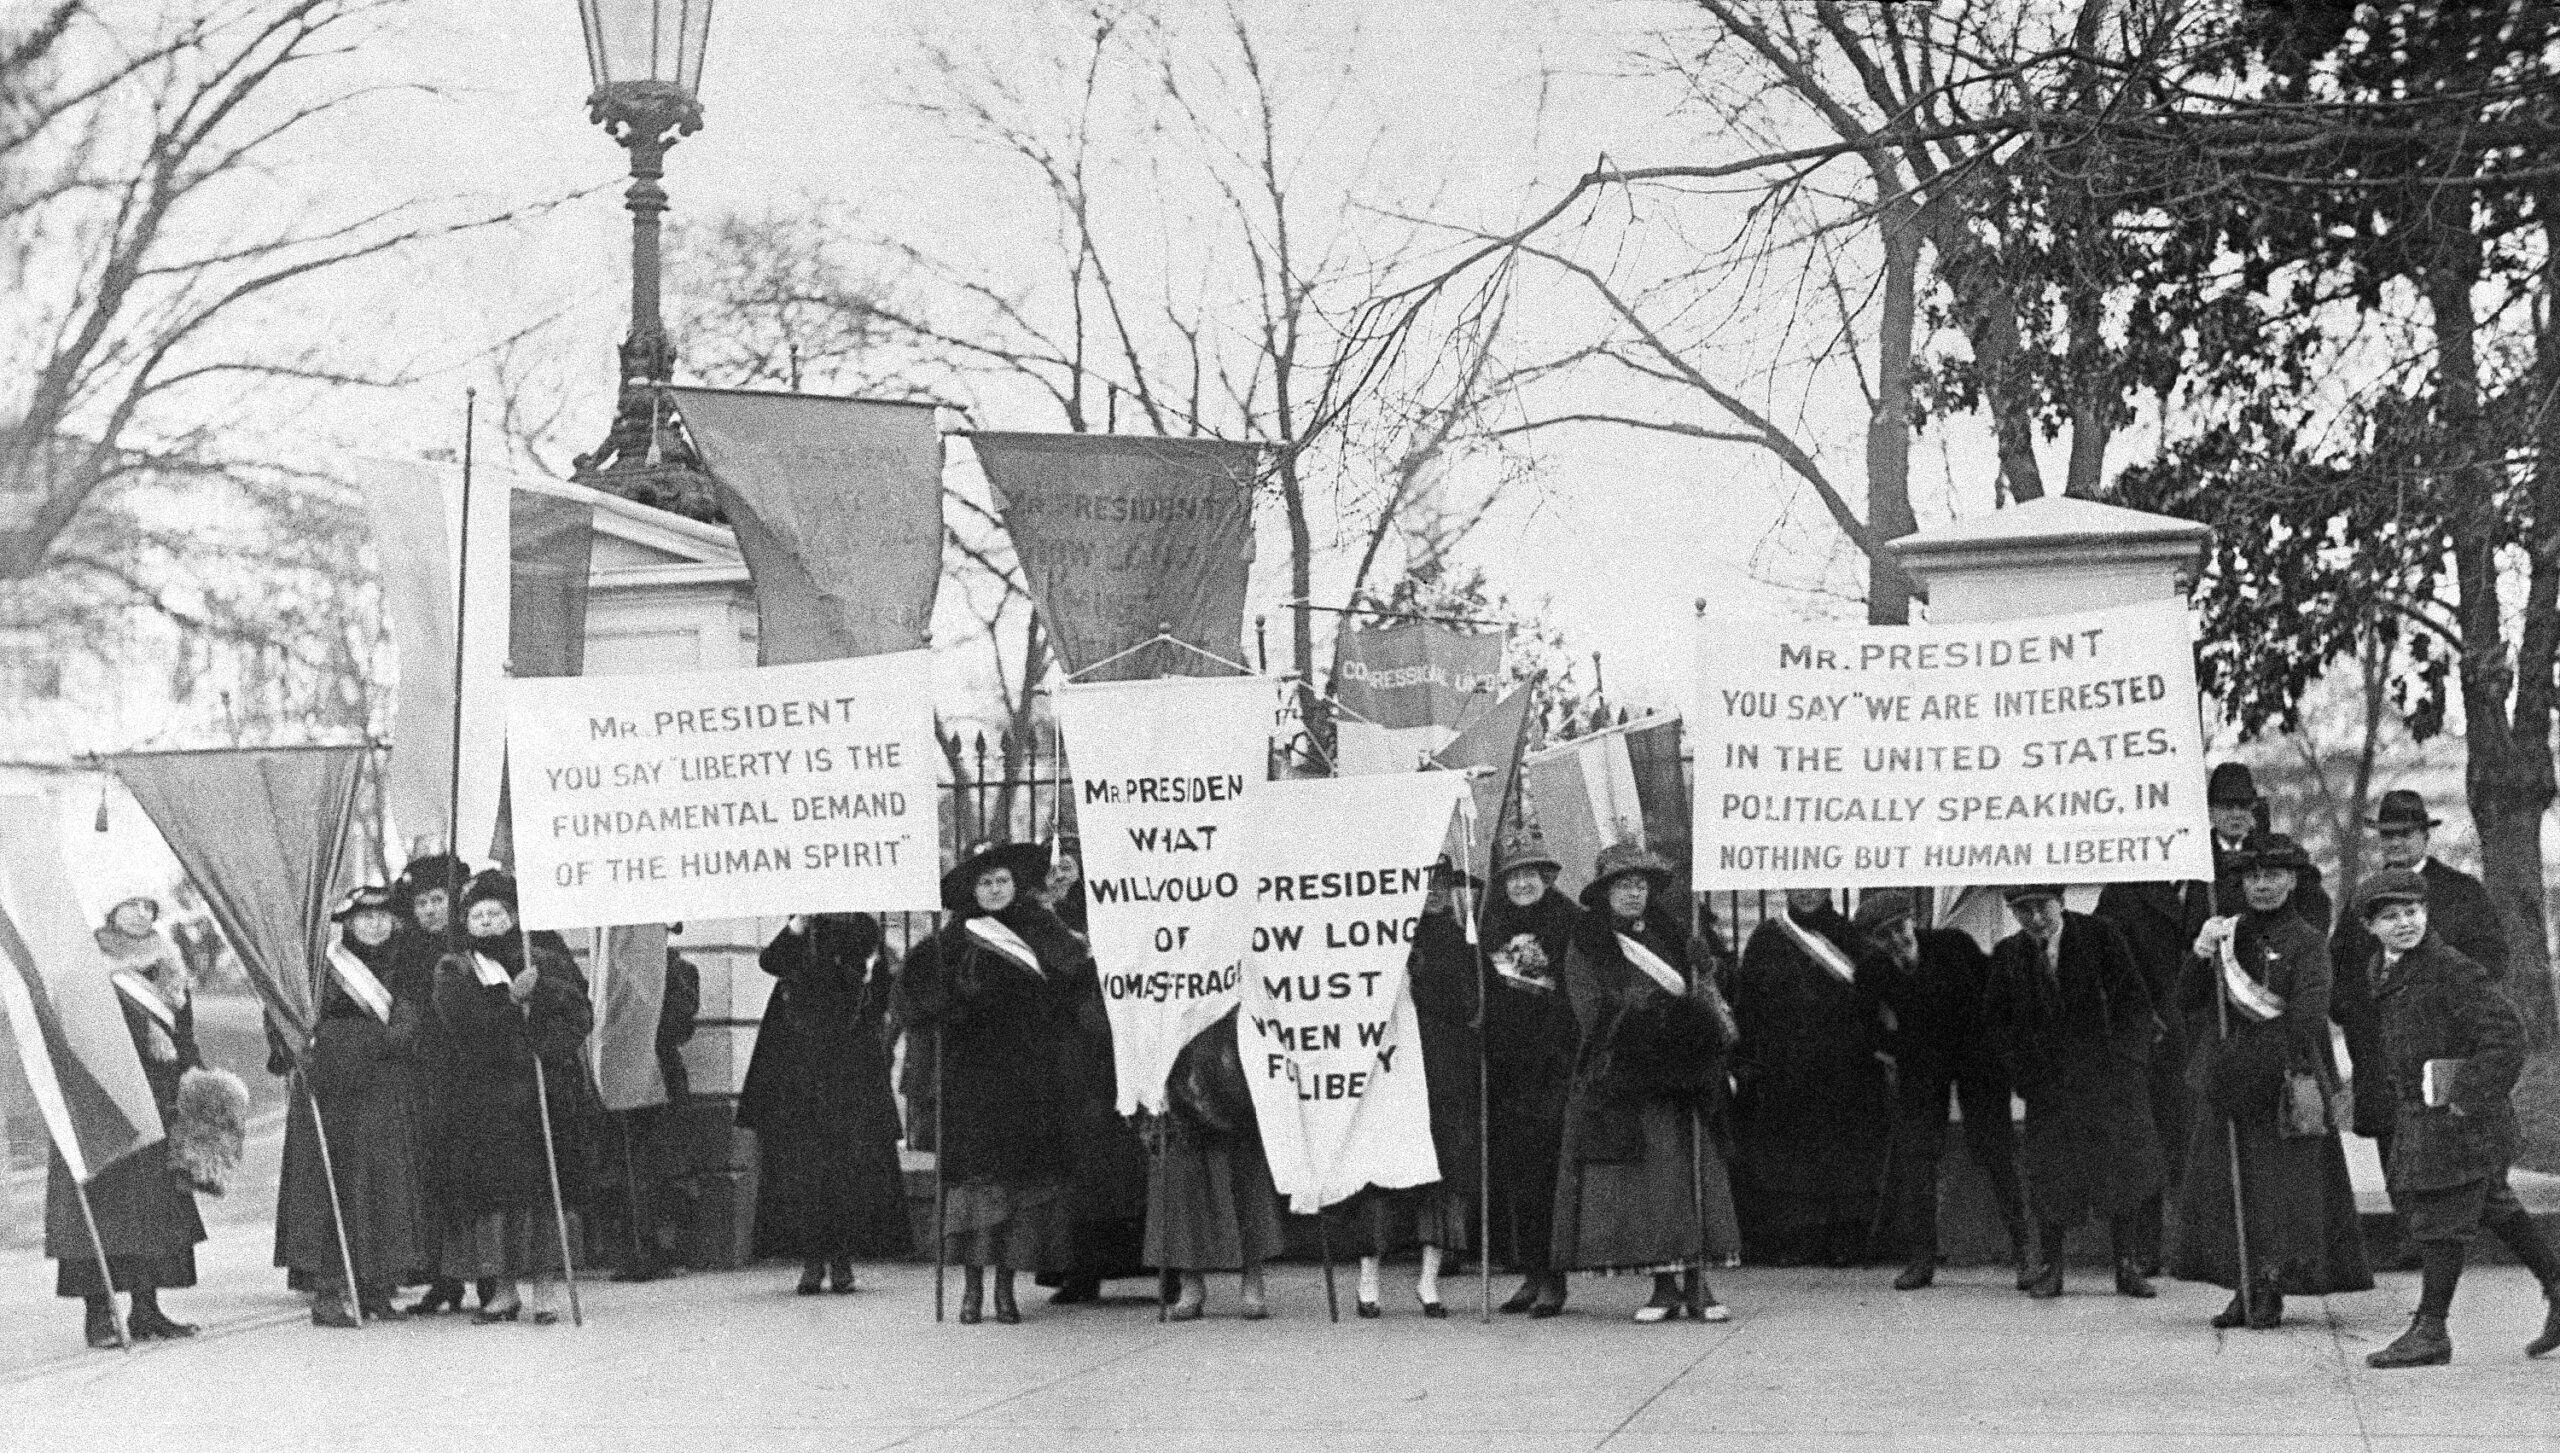 Women picket at White House gate in Washington, D.C. in 1918.